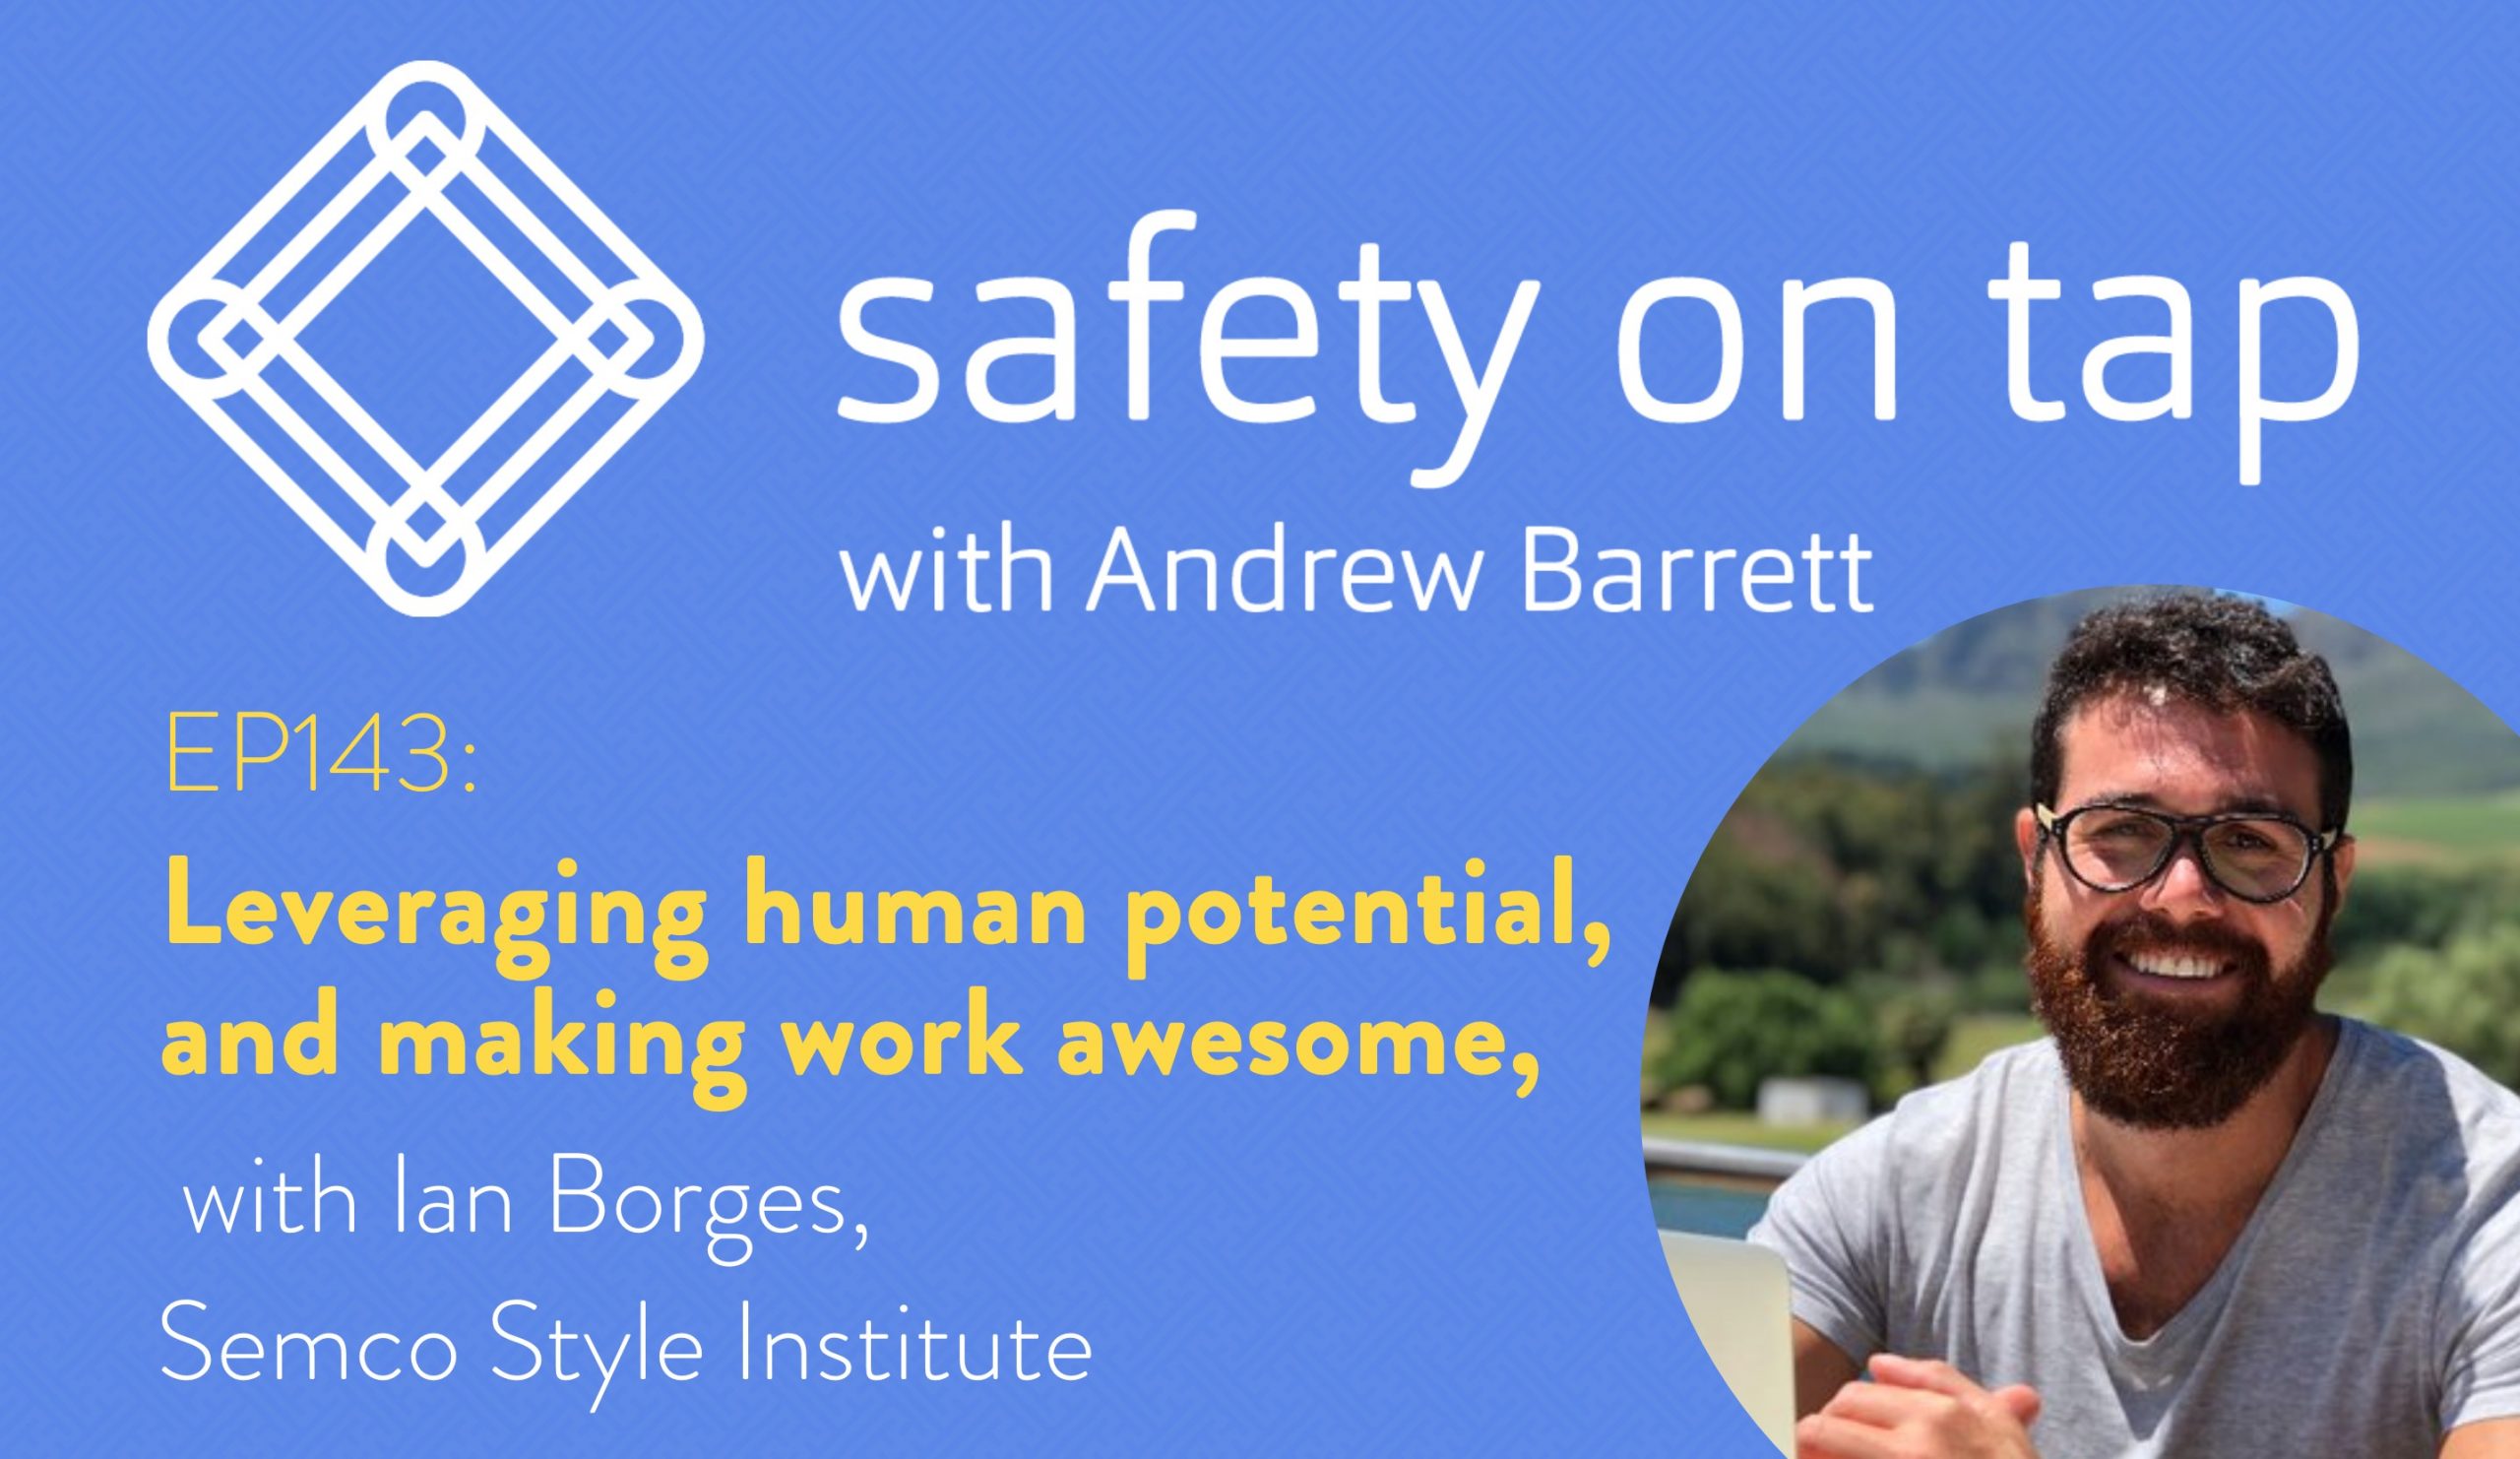 Ep143: Leveraging human potential, and making work awesome, with Ian Borges, Semco Style Institute